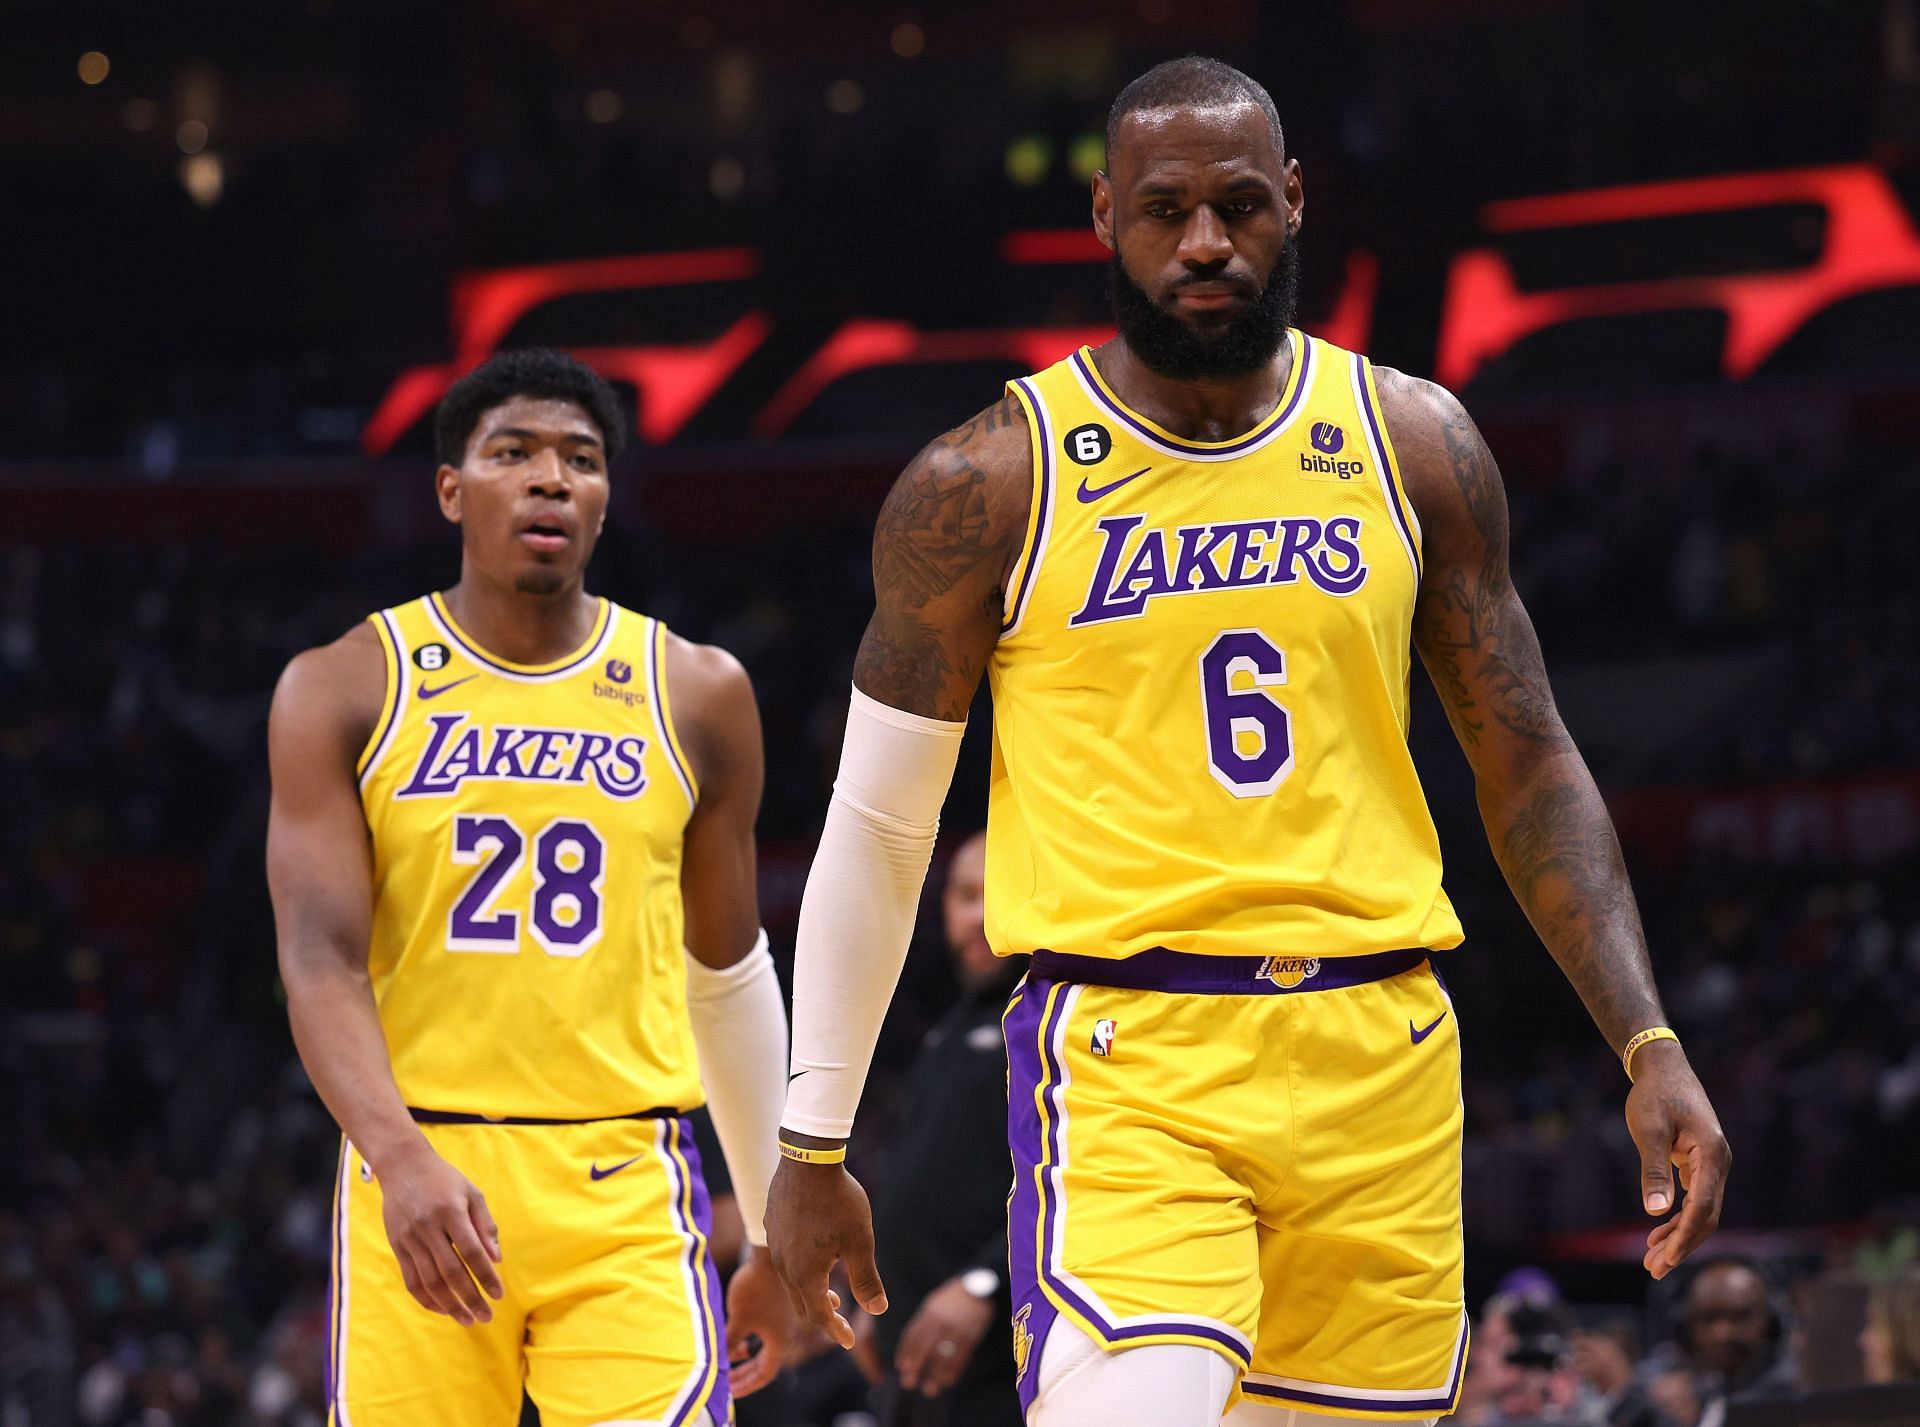 Watch: After LeBron James calls him 'Daniel-san', Rui Hachimura and 4 x NBA  champ team up during Lakers practice